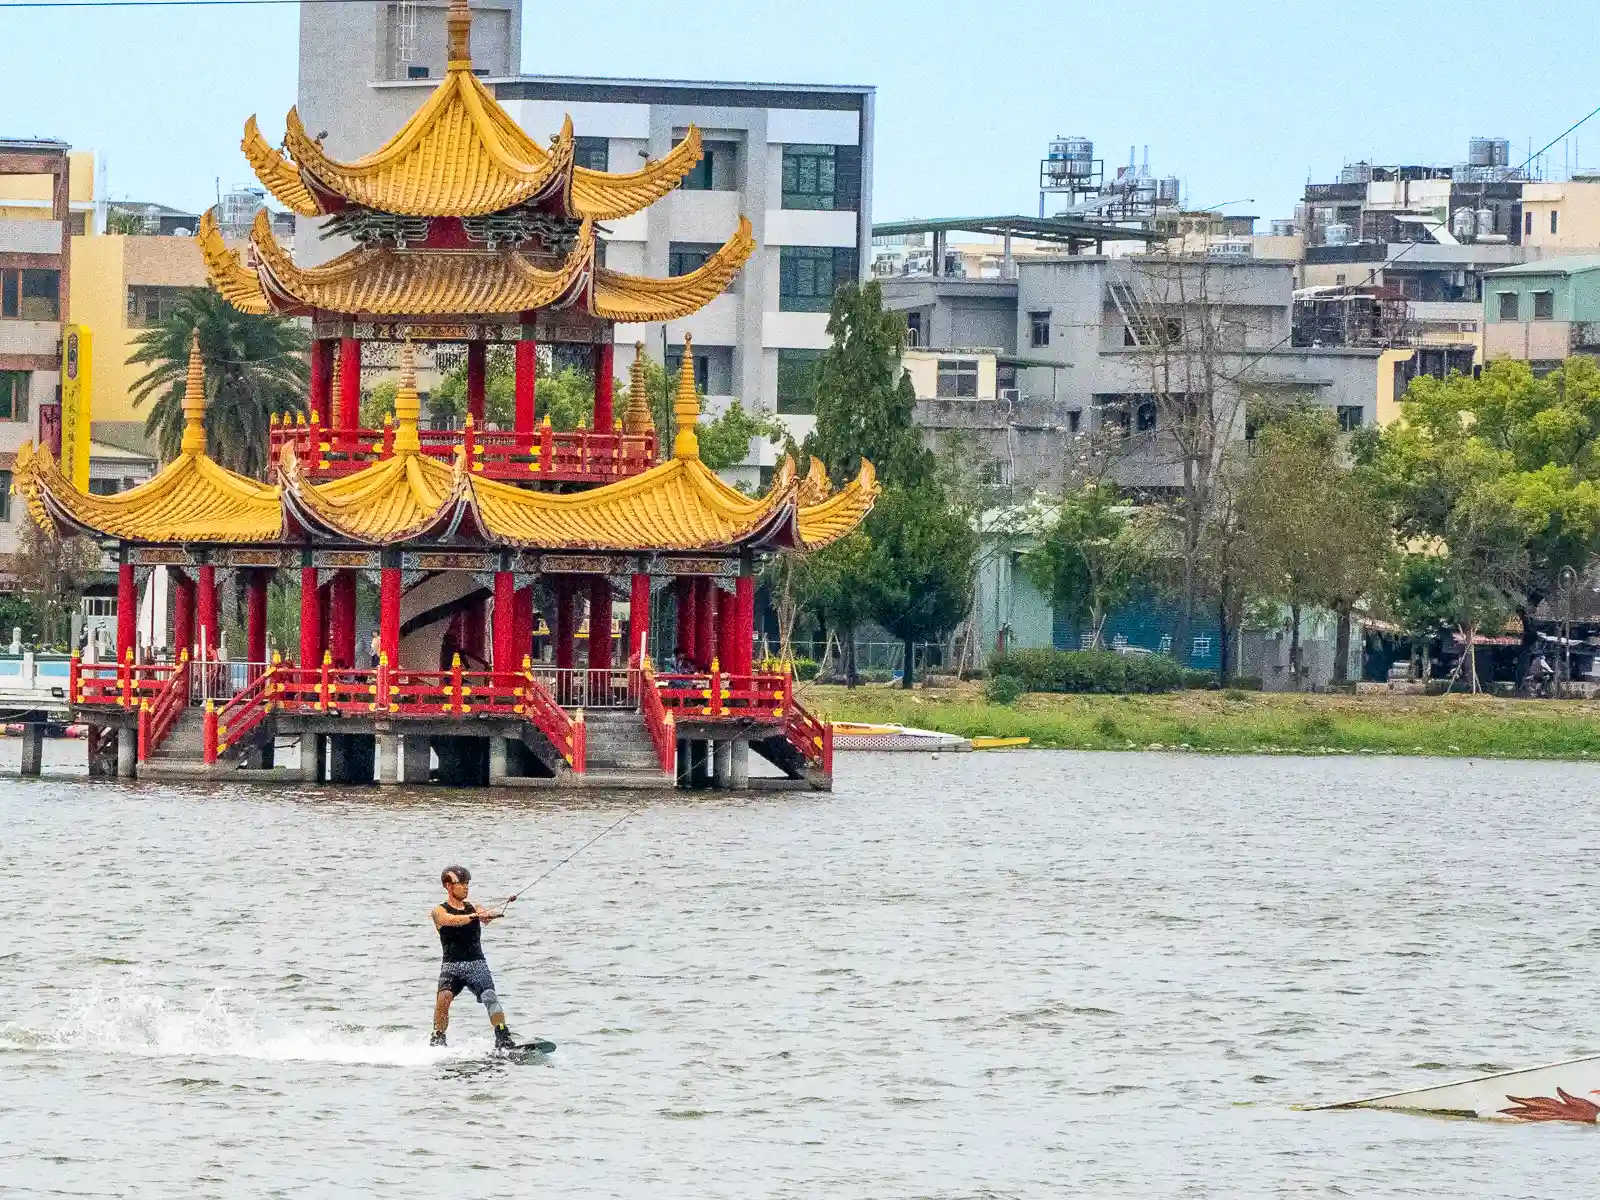 A wakeboarder rides in front of one of the floating temples of Lotus Pond.